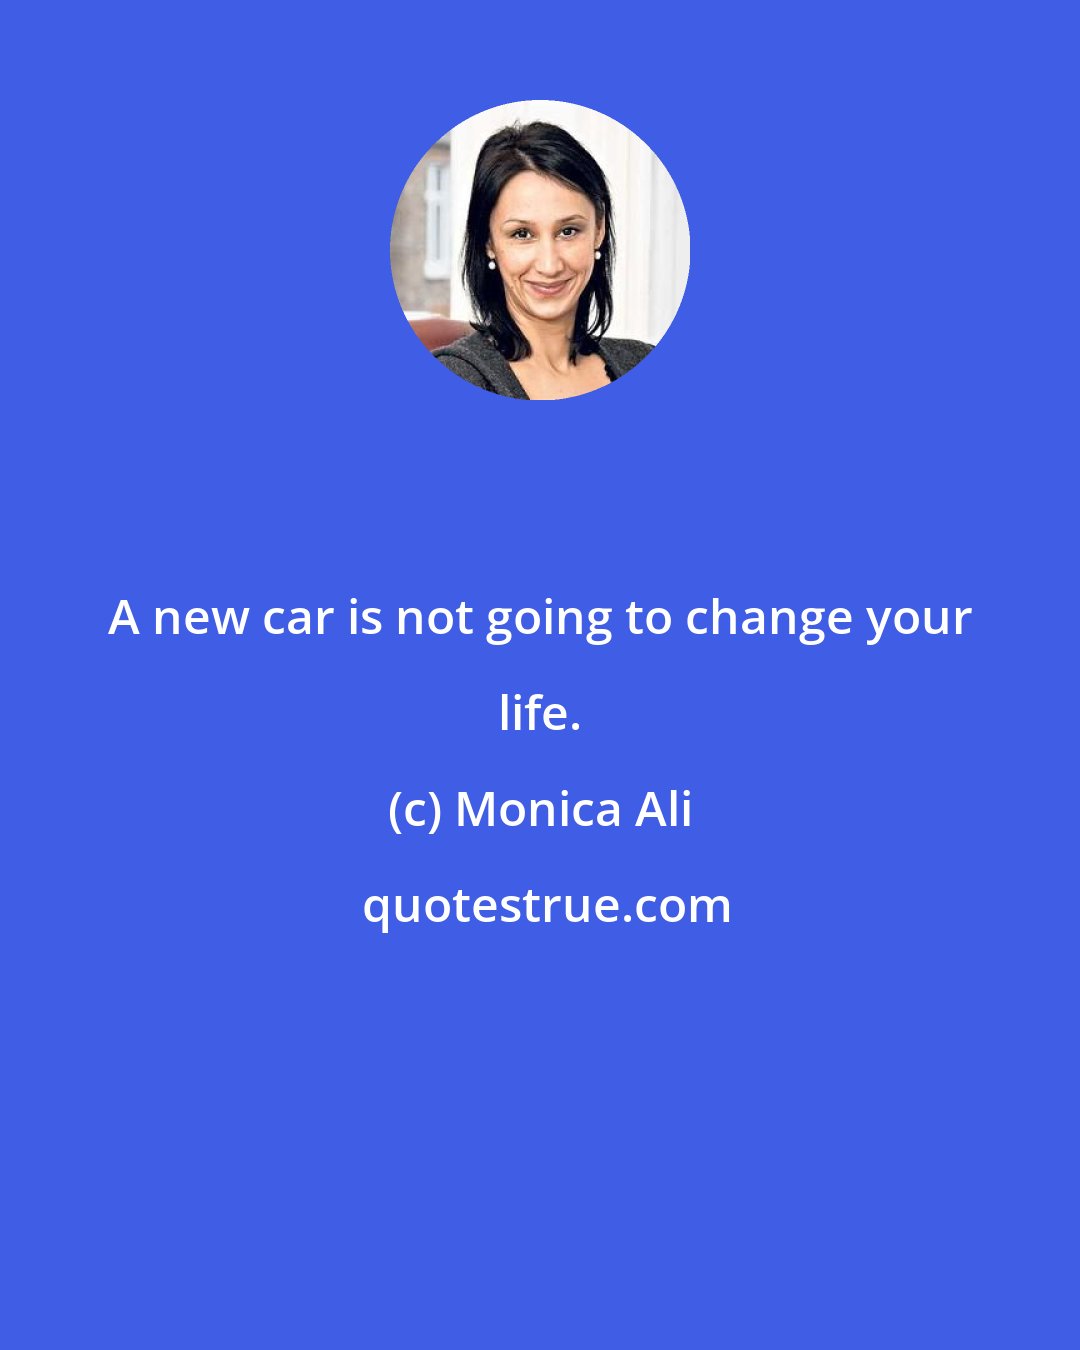 Monica Ali: A new car is not going to change your life.